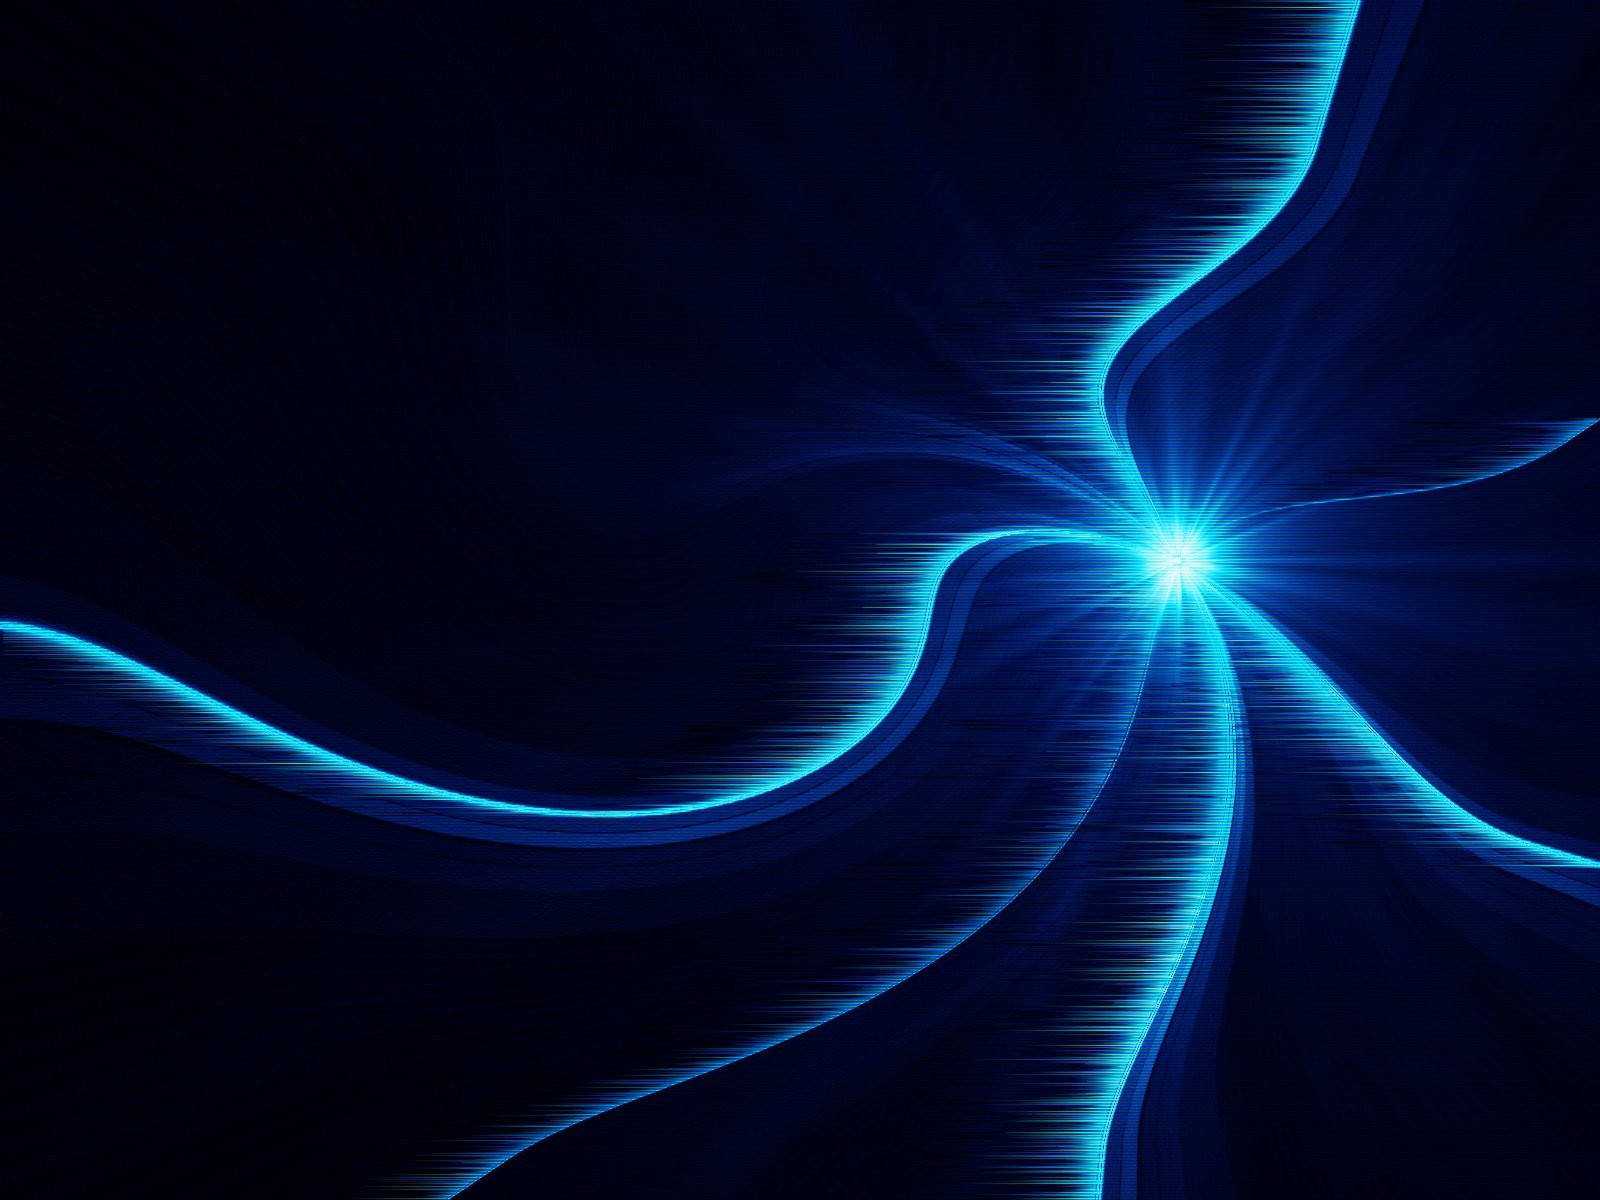 Glowing Curves Black And Blue Background Wallpaper